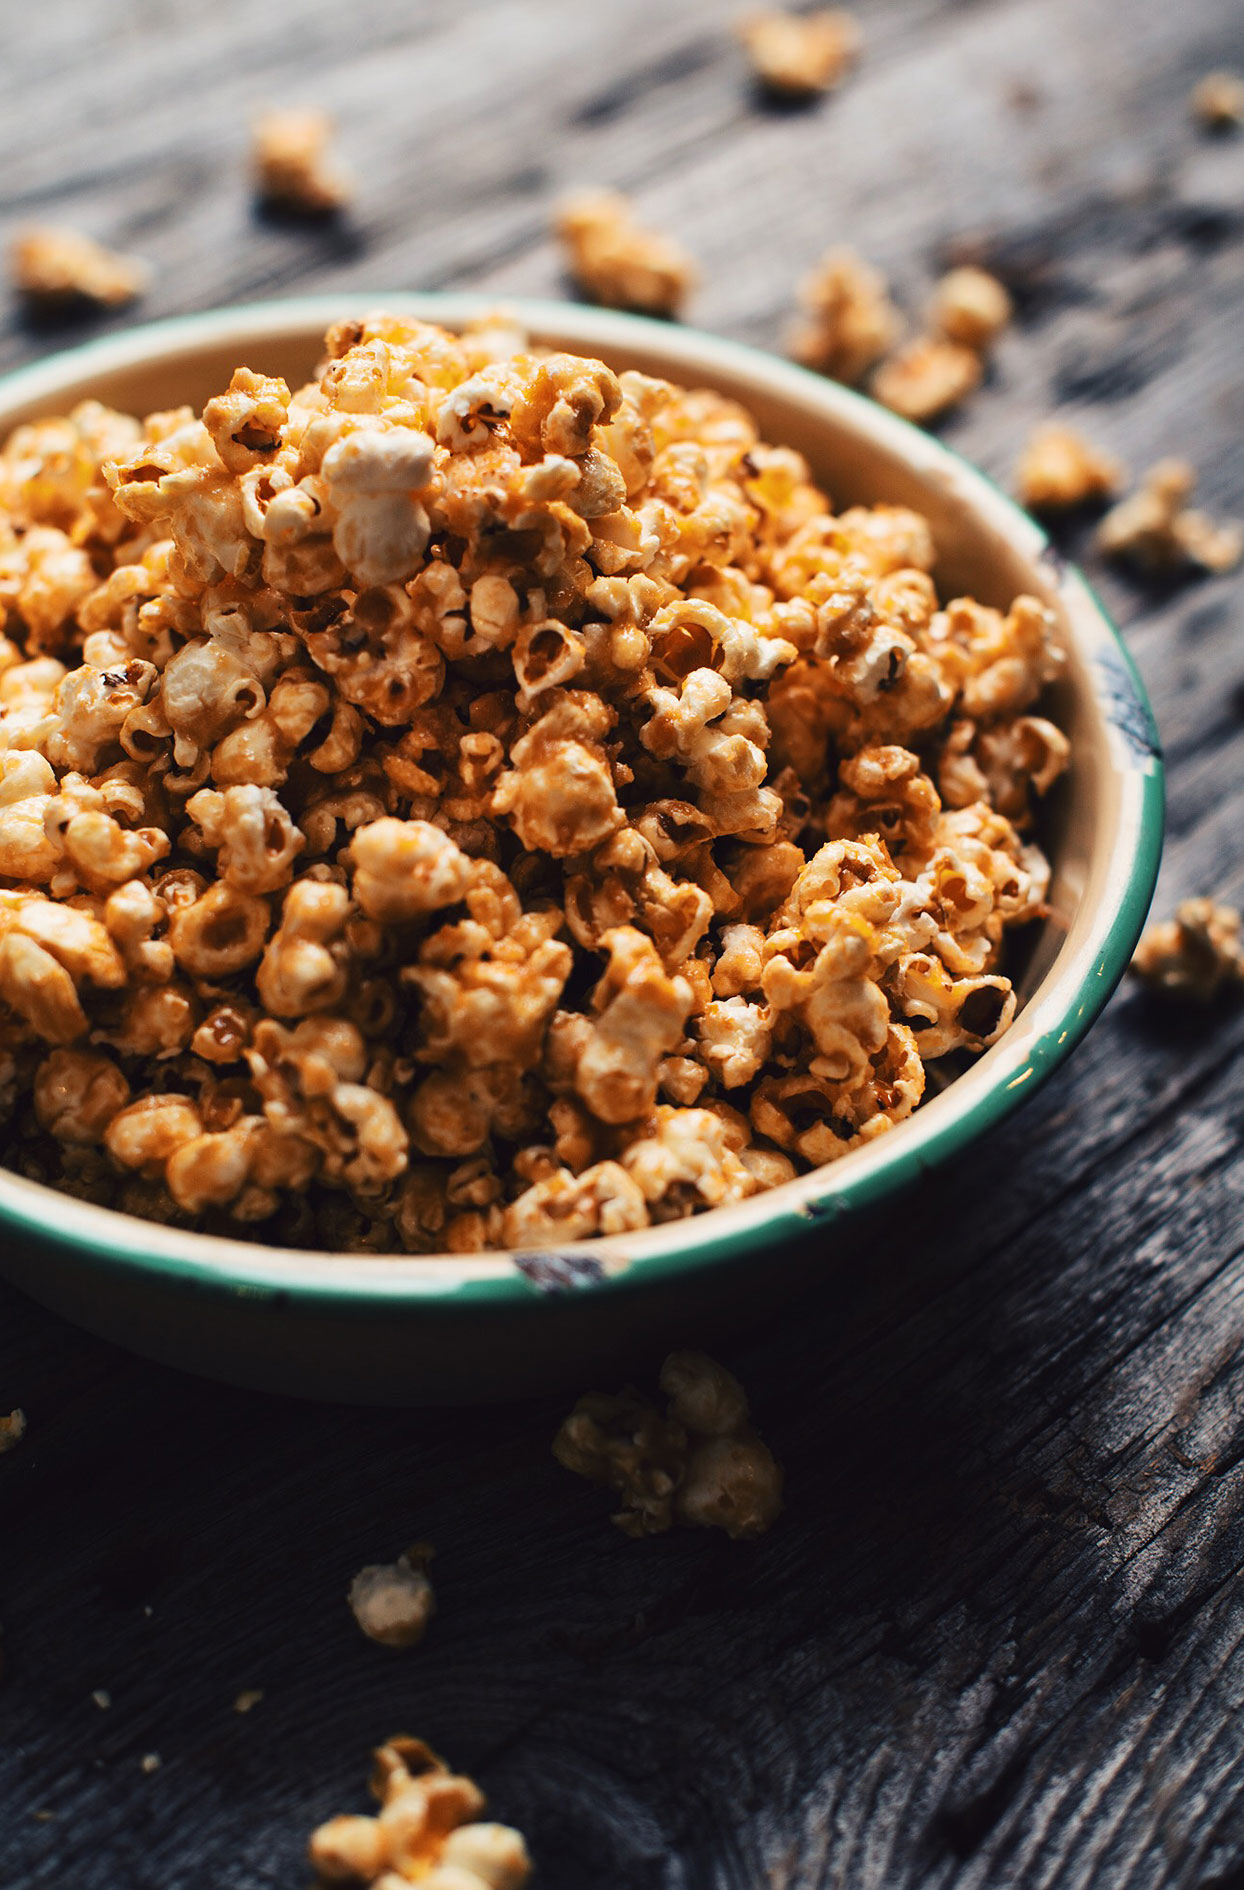 Popcorn with maple and Sortilège caramel